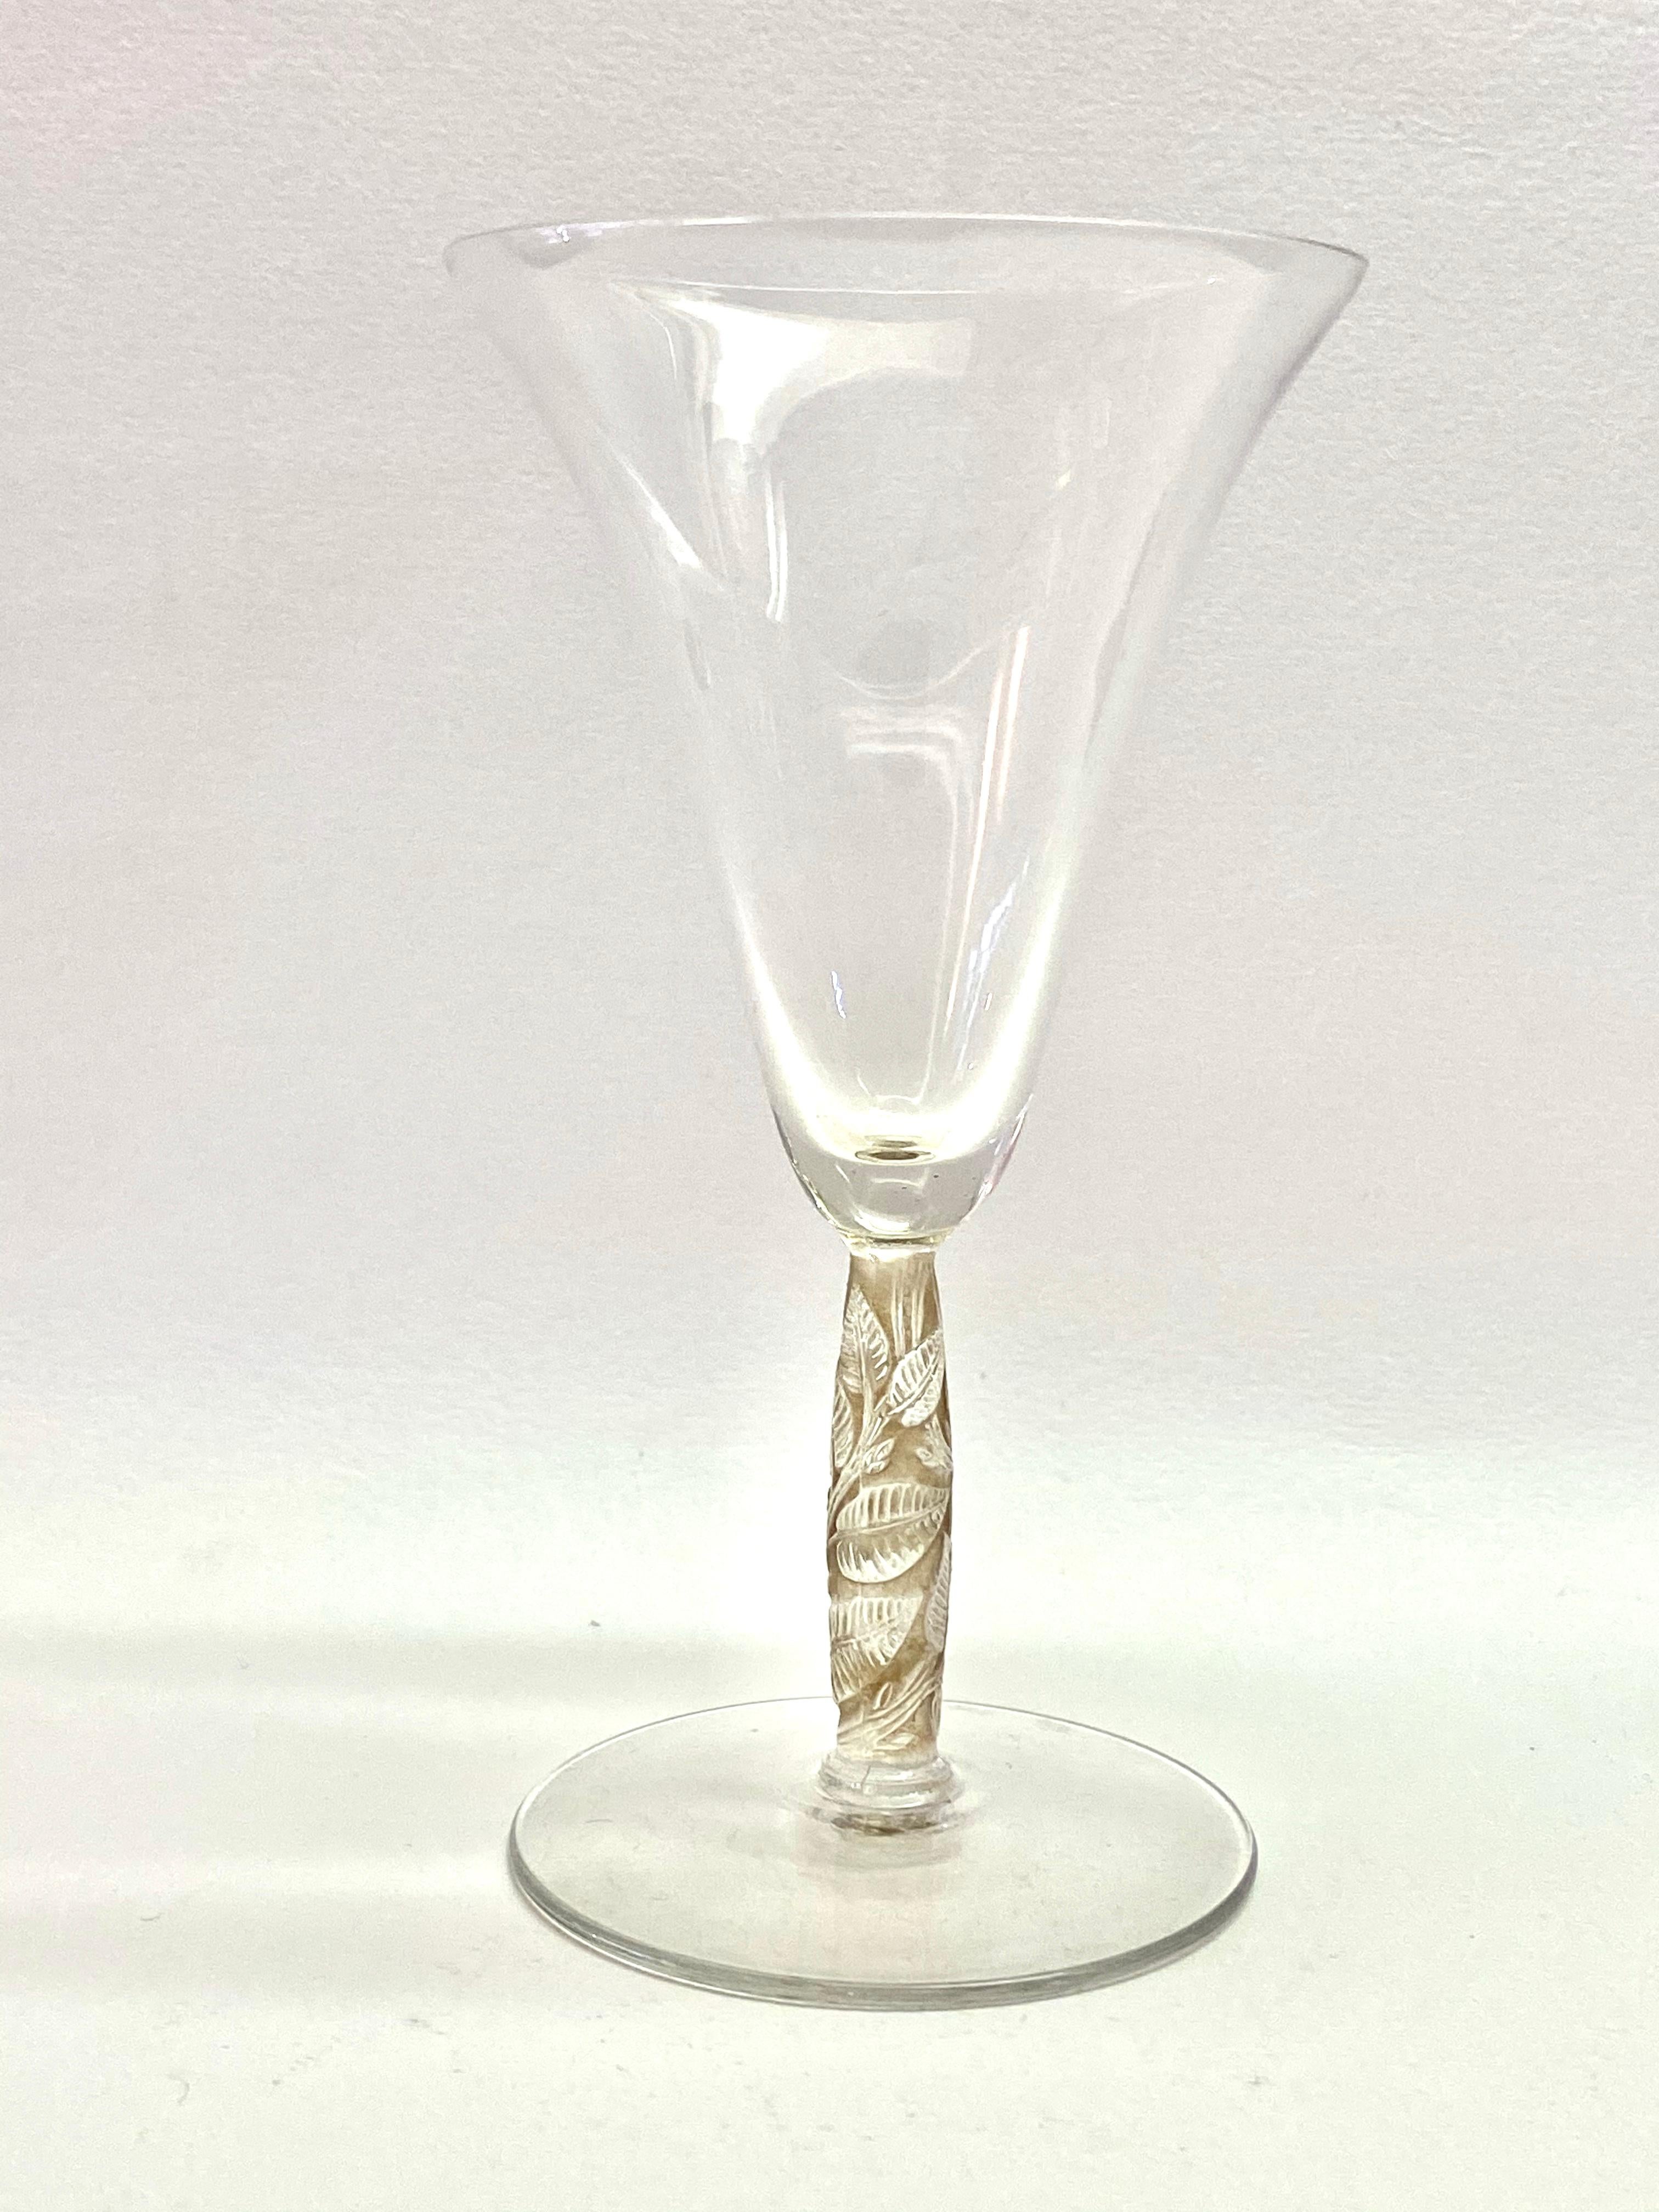 Set of 5 drinking glasses made by René Lalique in 1925. Model is named 